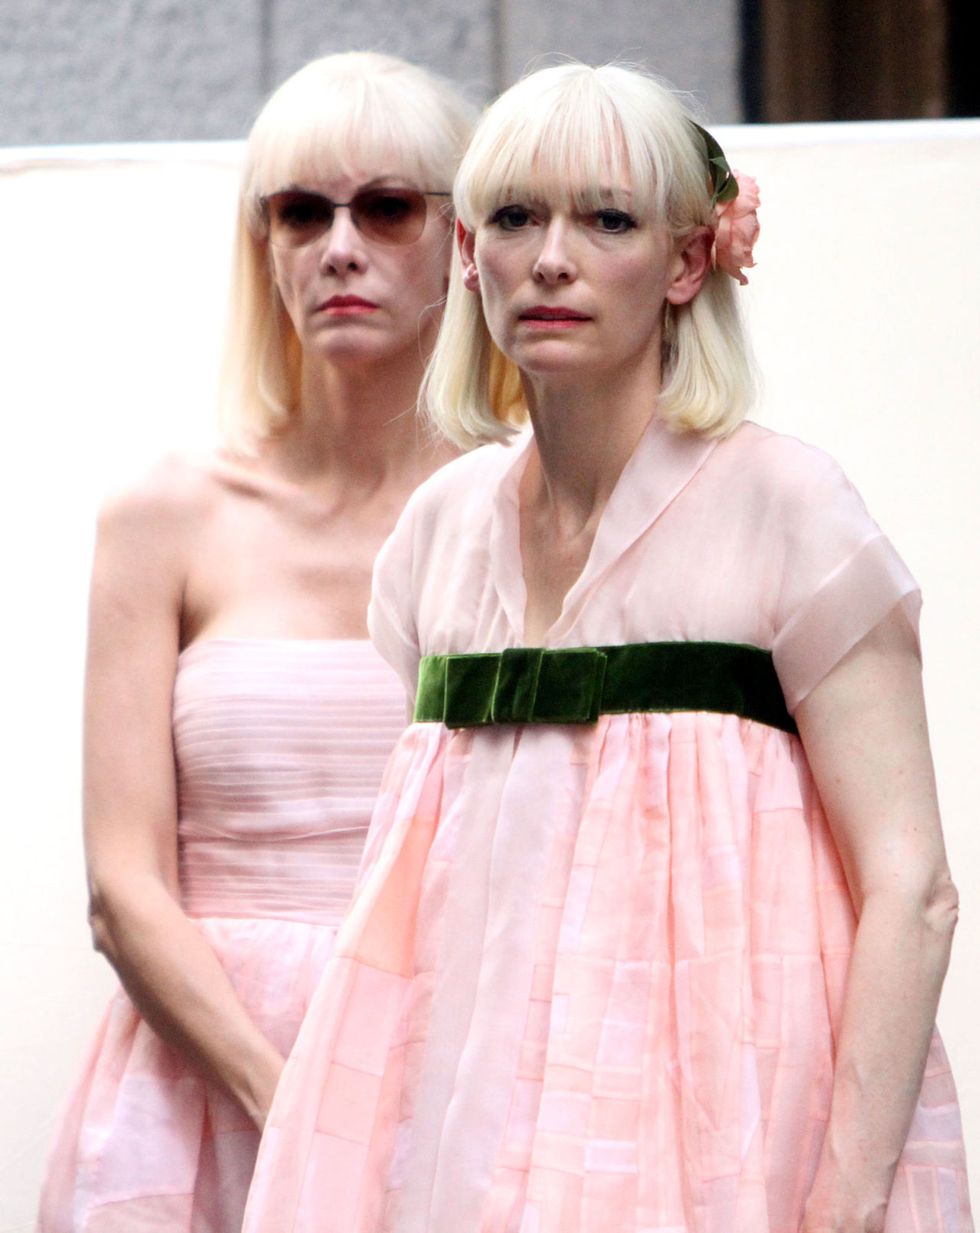 <p>Just two ladies playing a villain <a href="http://www.marieclaire.com/celebrity/news/a27321/tilda-swinton-okja-villain-ivanka-trump/" target="_blank" data-tracking-id="recirc-text-link">based on a certain "daughter from a dubious dynasty."</a> </p>